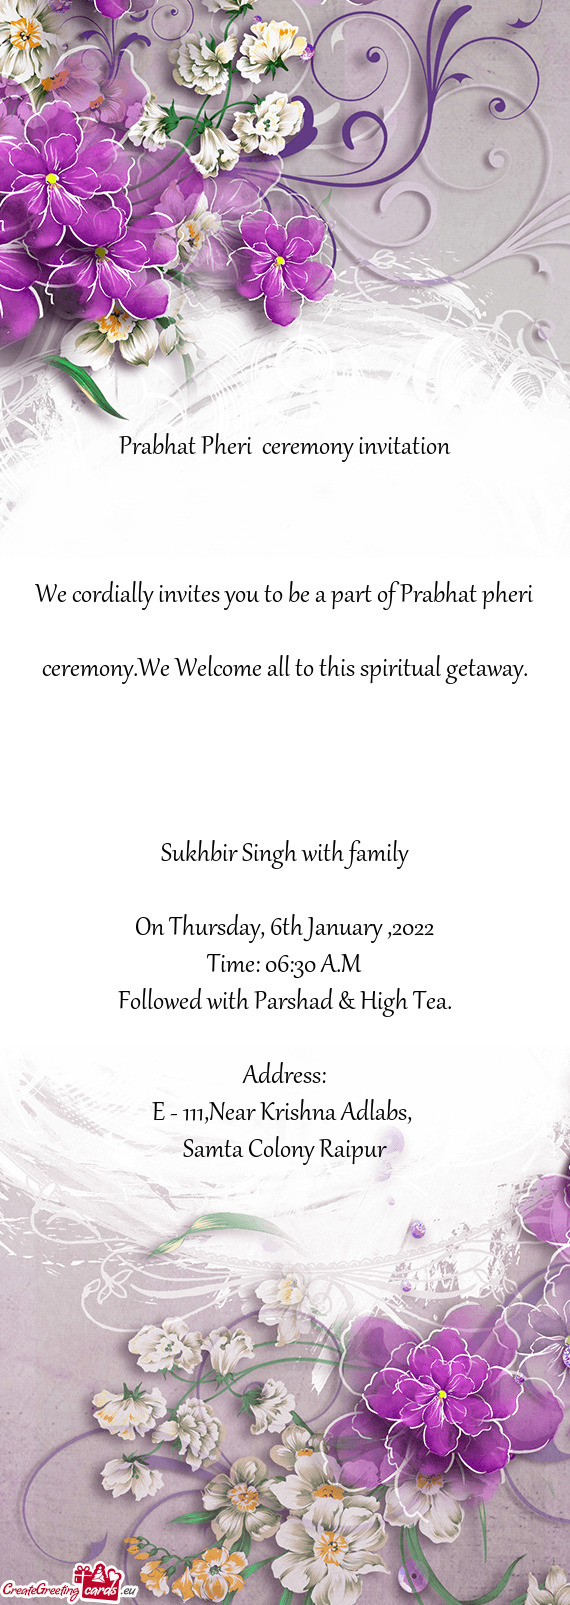 We cordially invites you to be a part of Prabhat pheri ceremony.We Welcome all to this spiritual ge